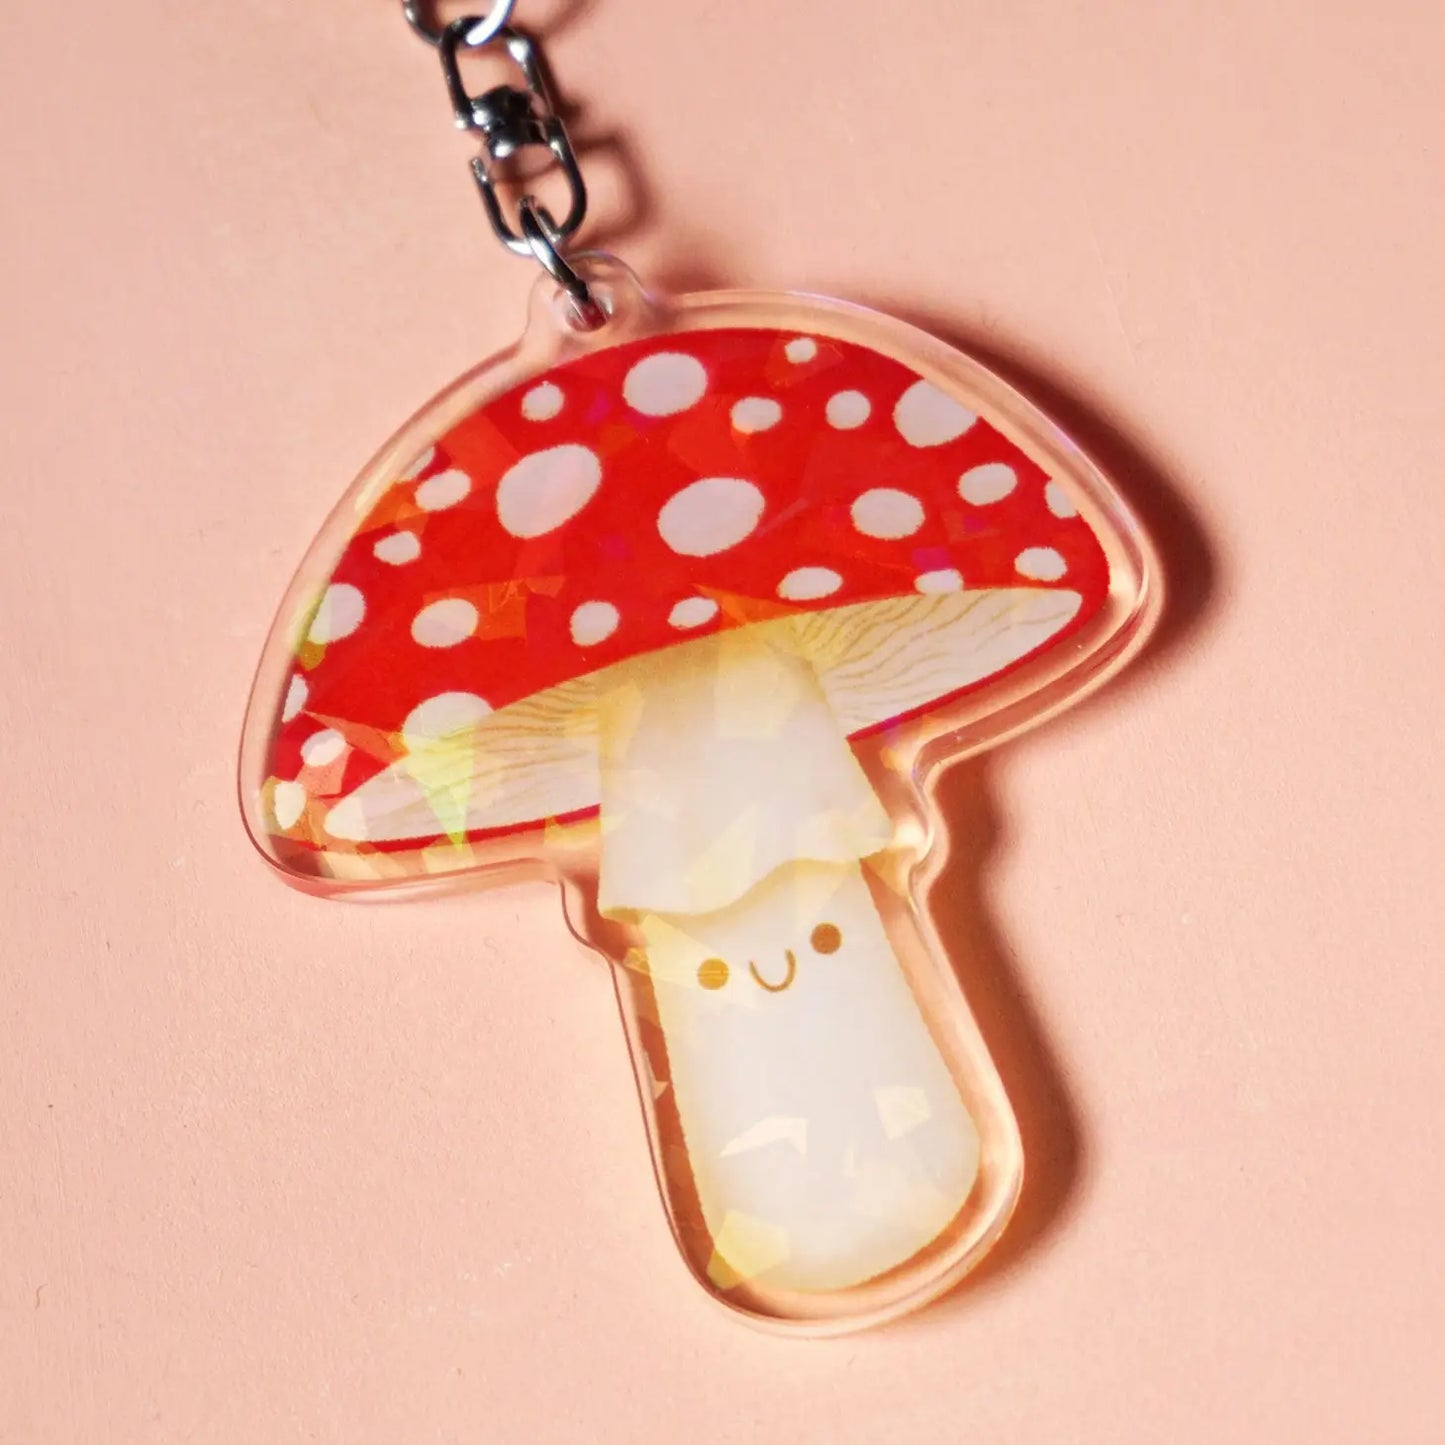 Nellie Le: Charm Keychains